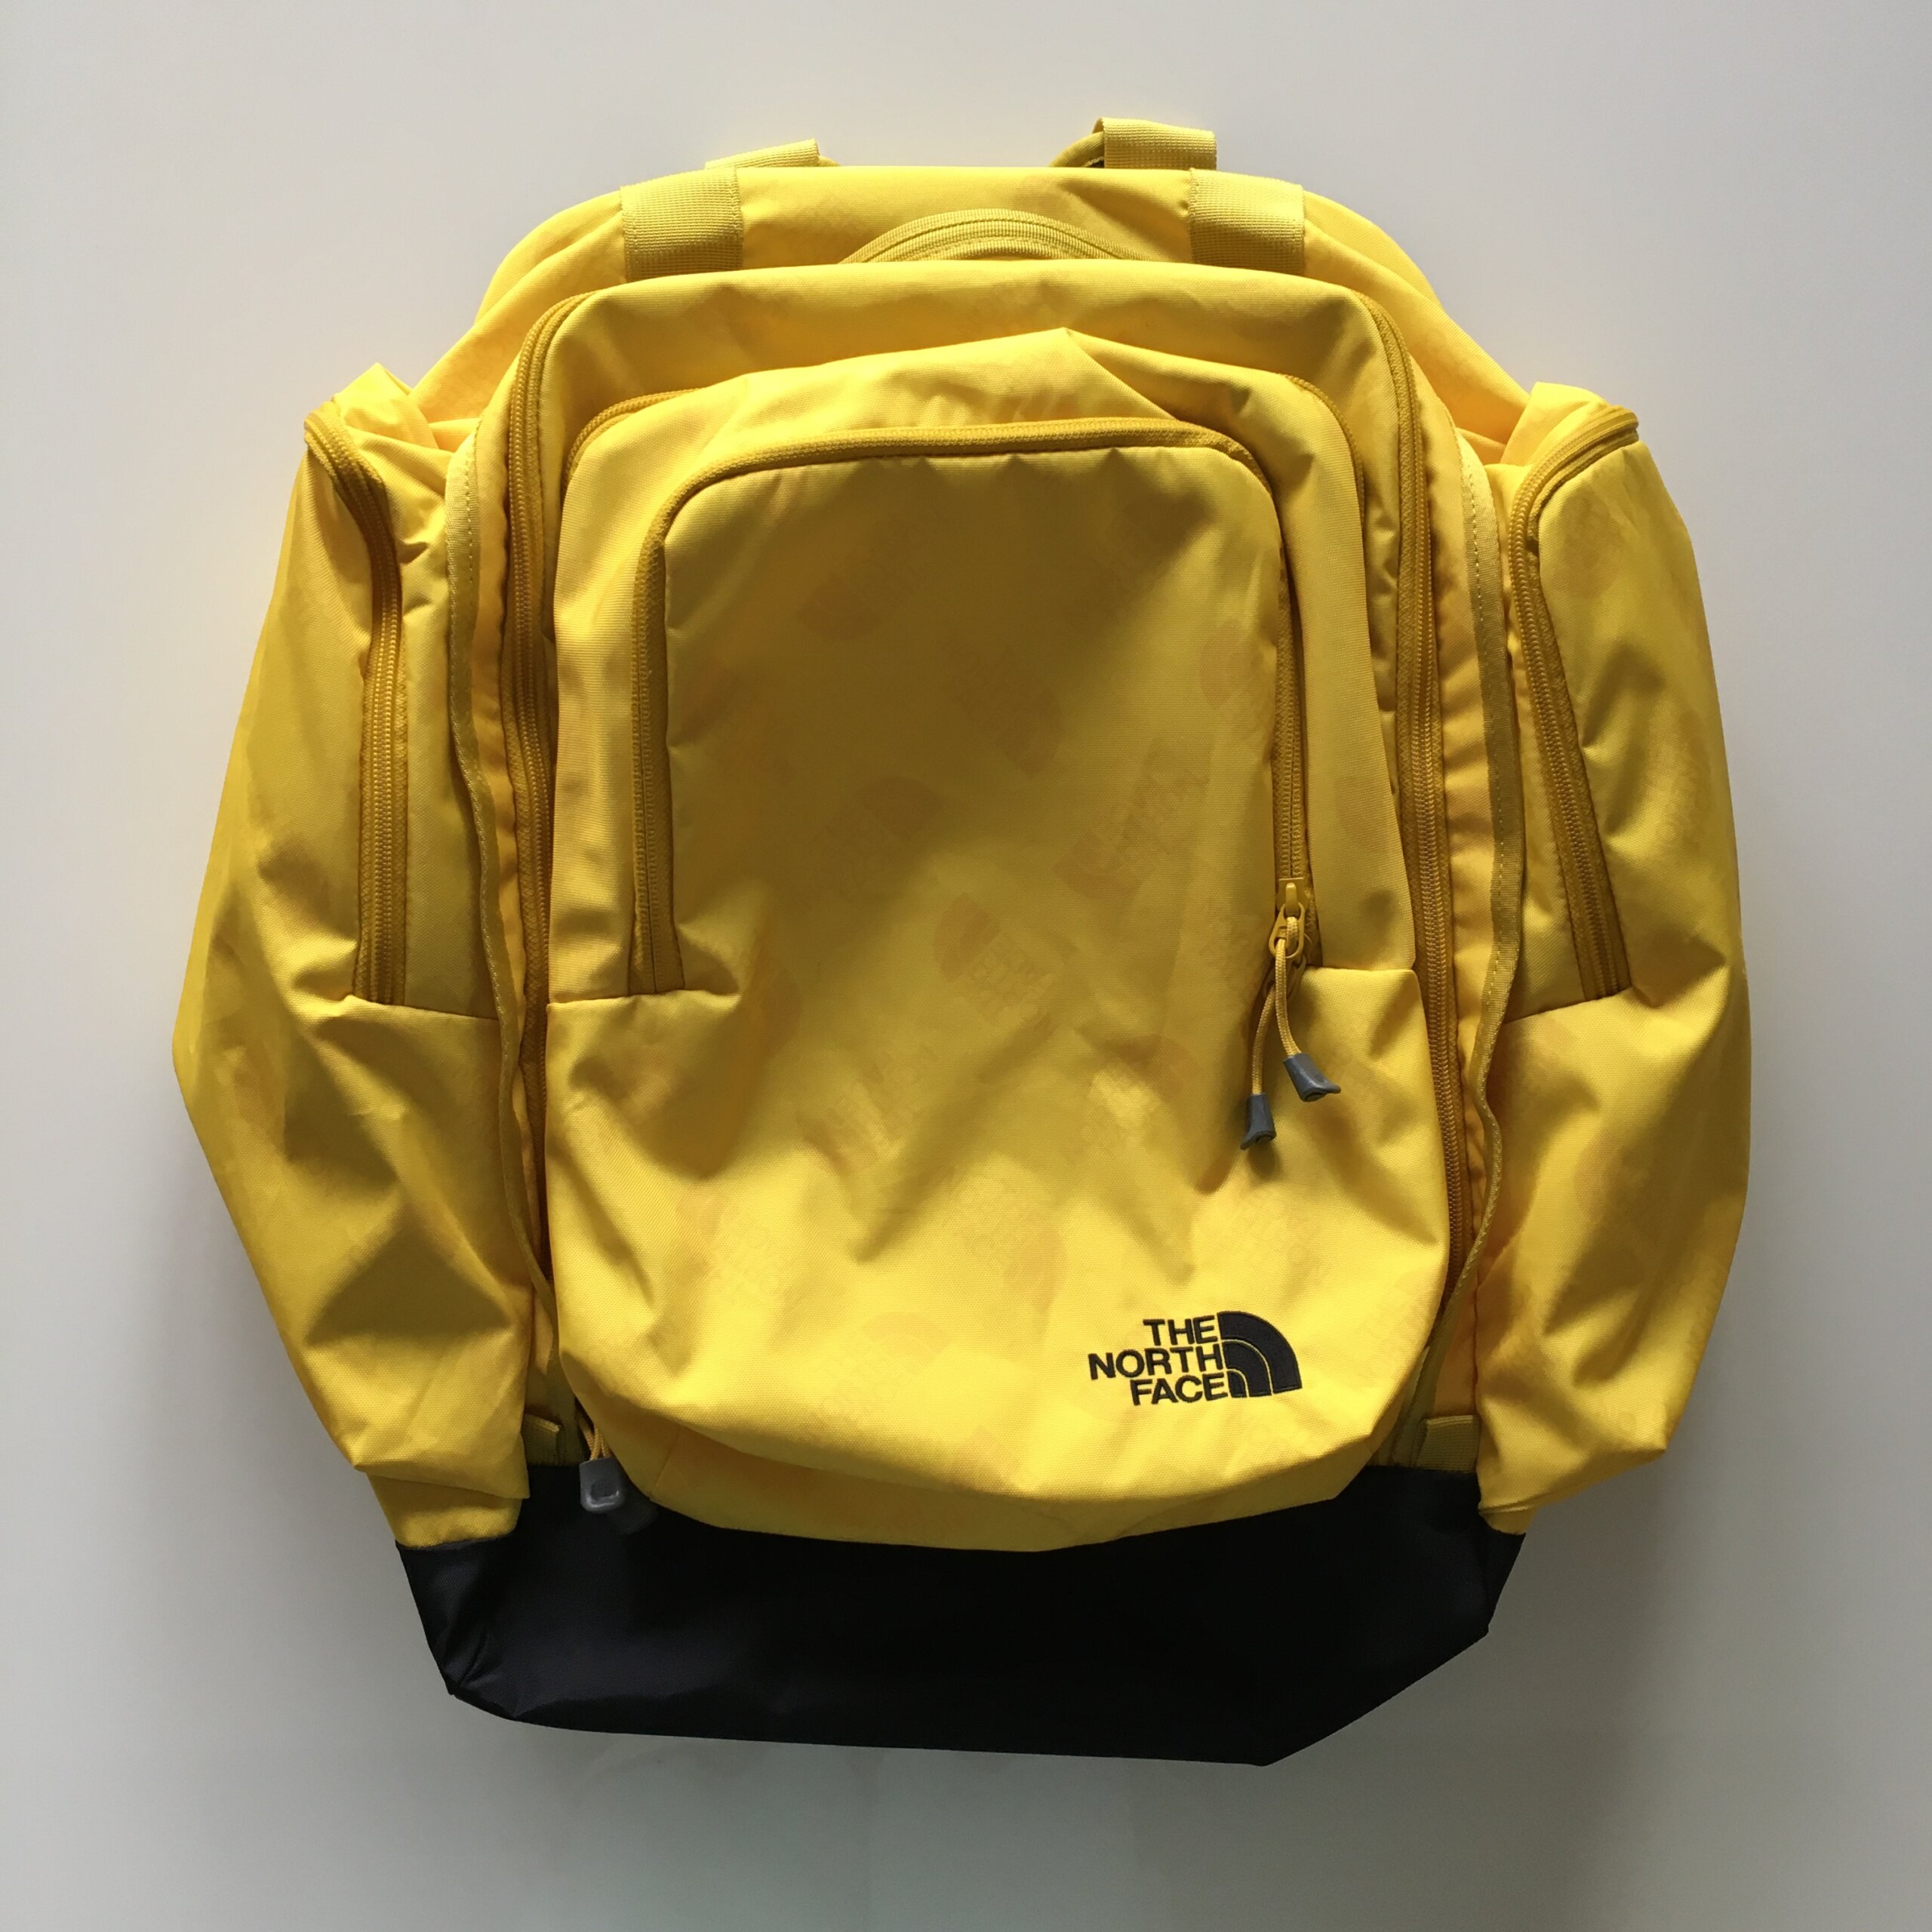 【THE NORTH FACE】サニーキャンパー40+6(キッズ)で上海渡航準備 | LEE